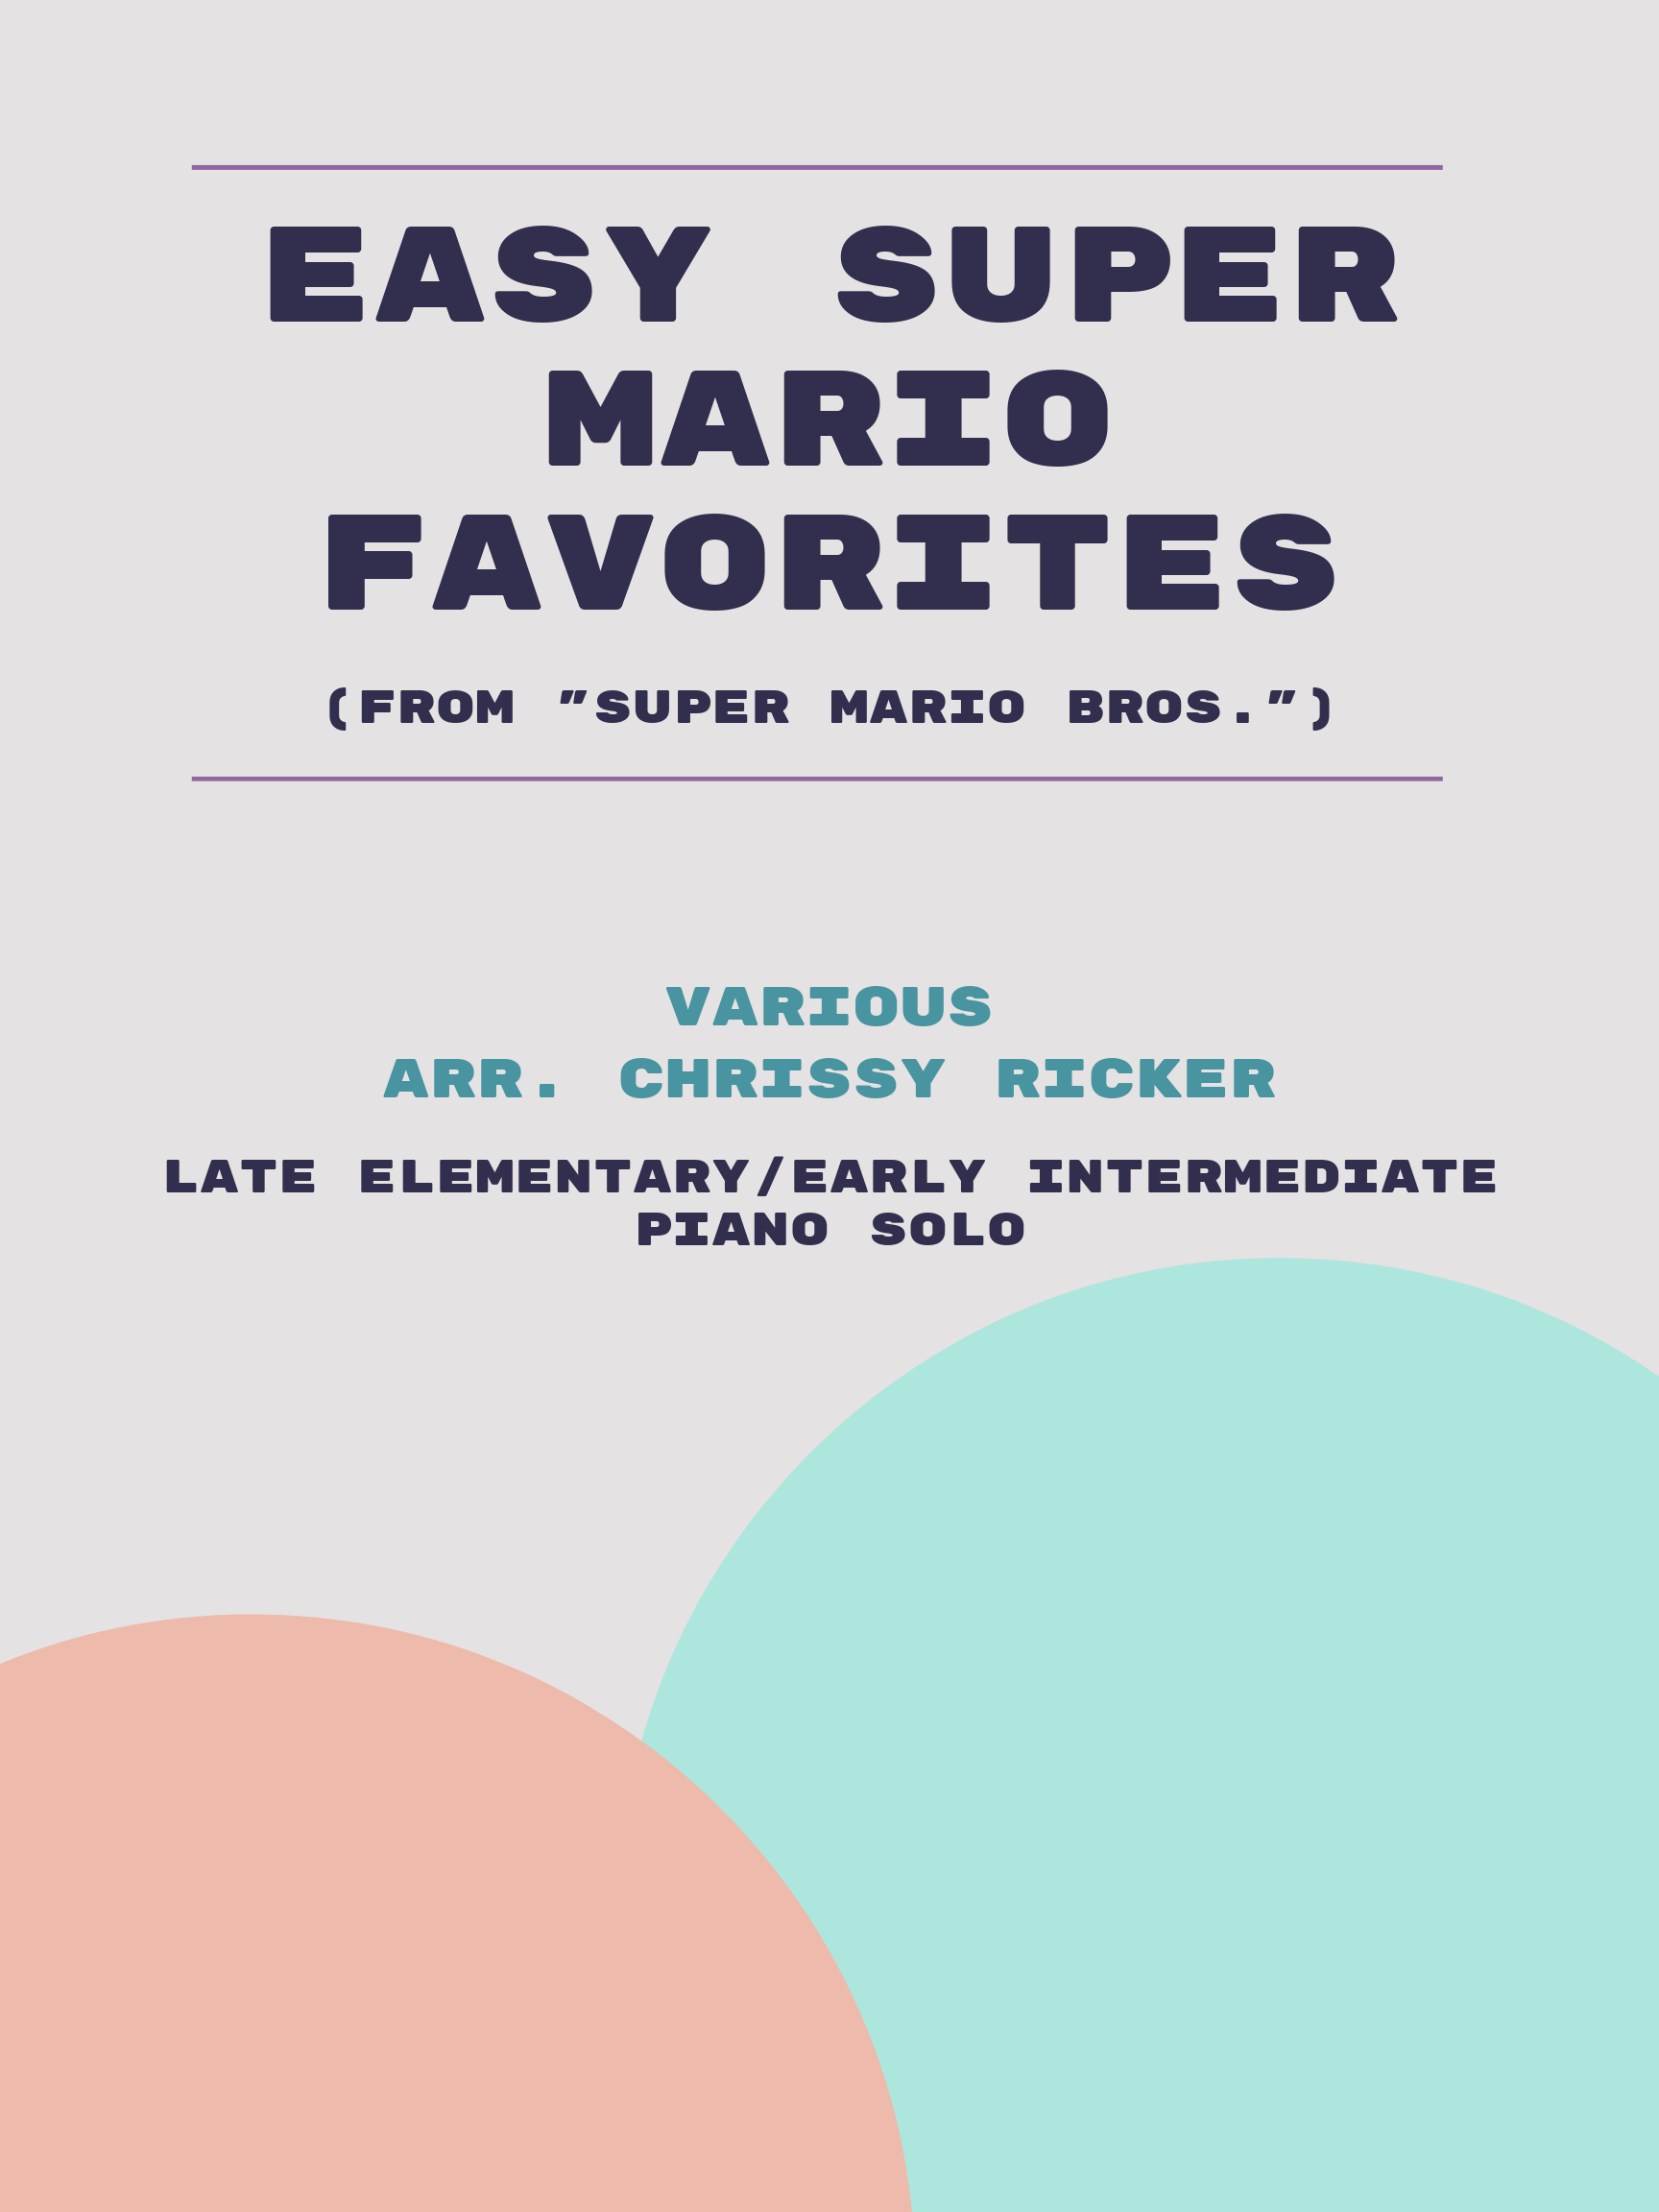 Easy Super Mario Favorites by Various